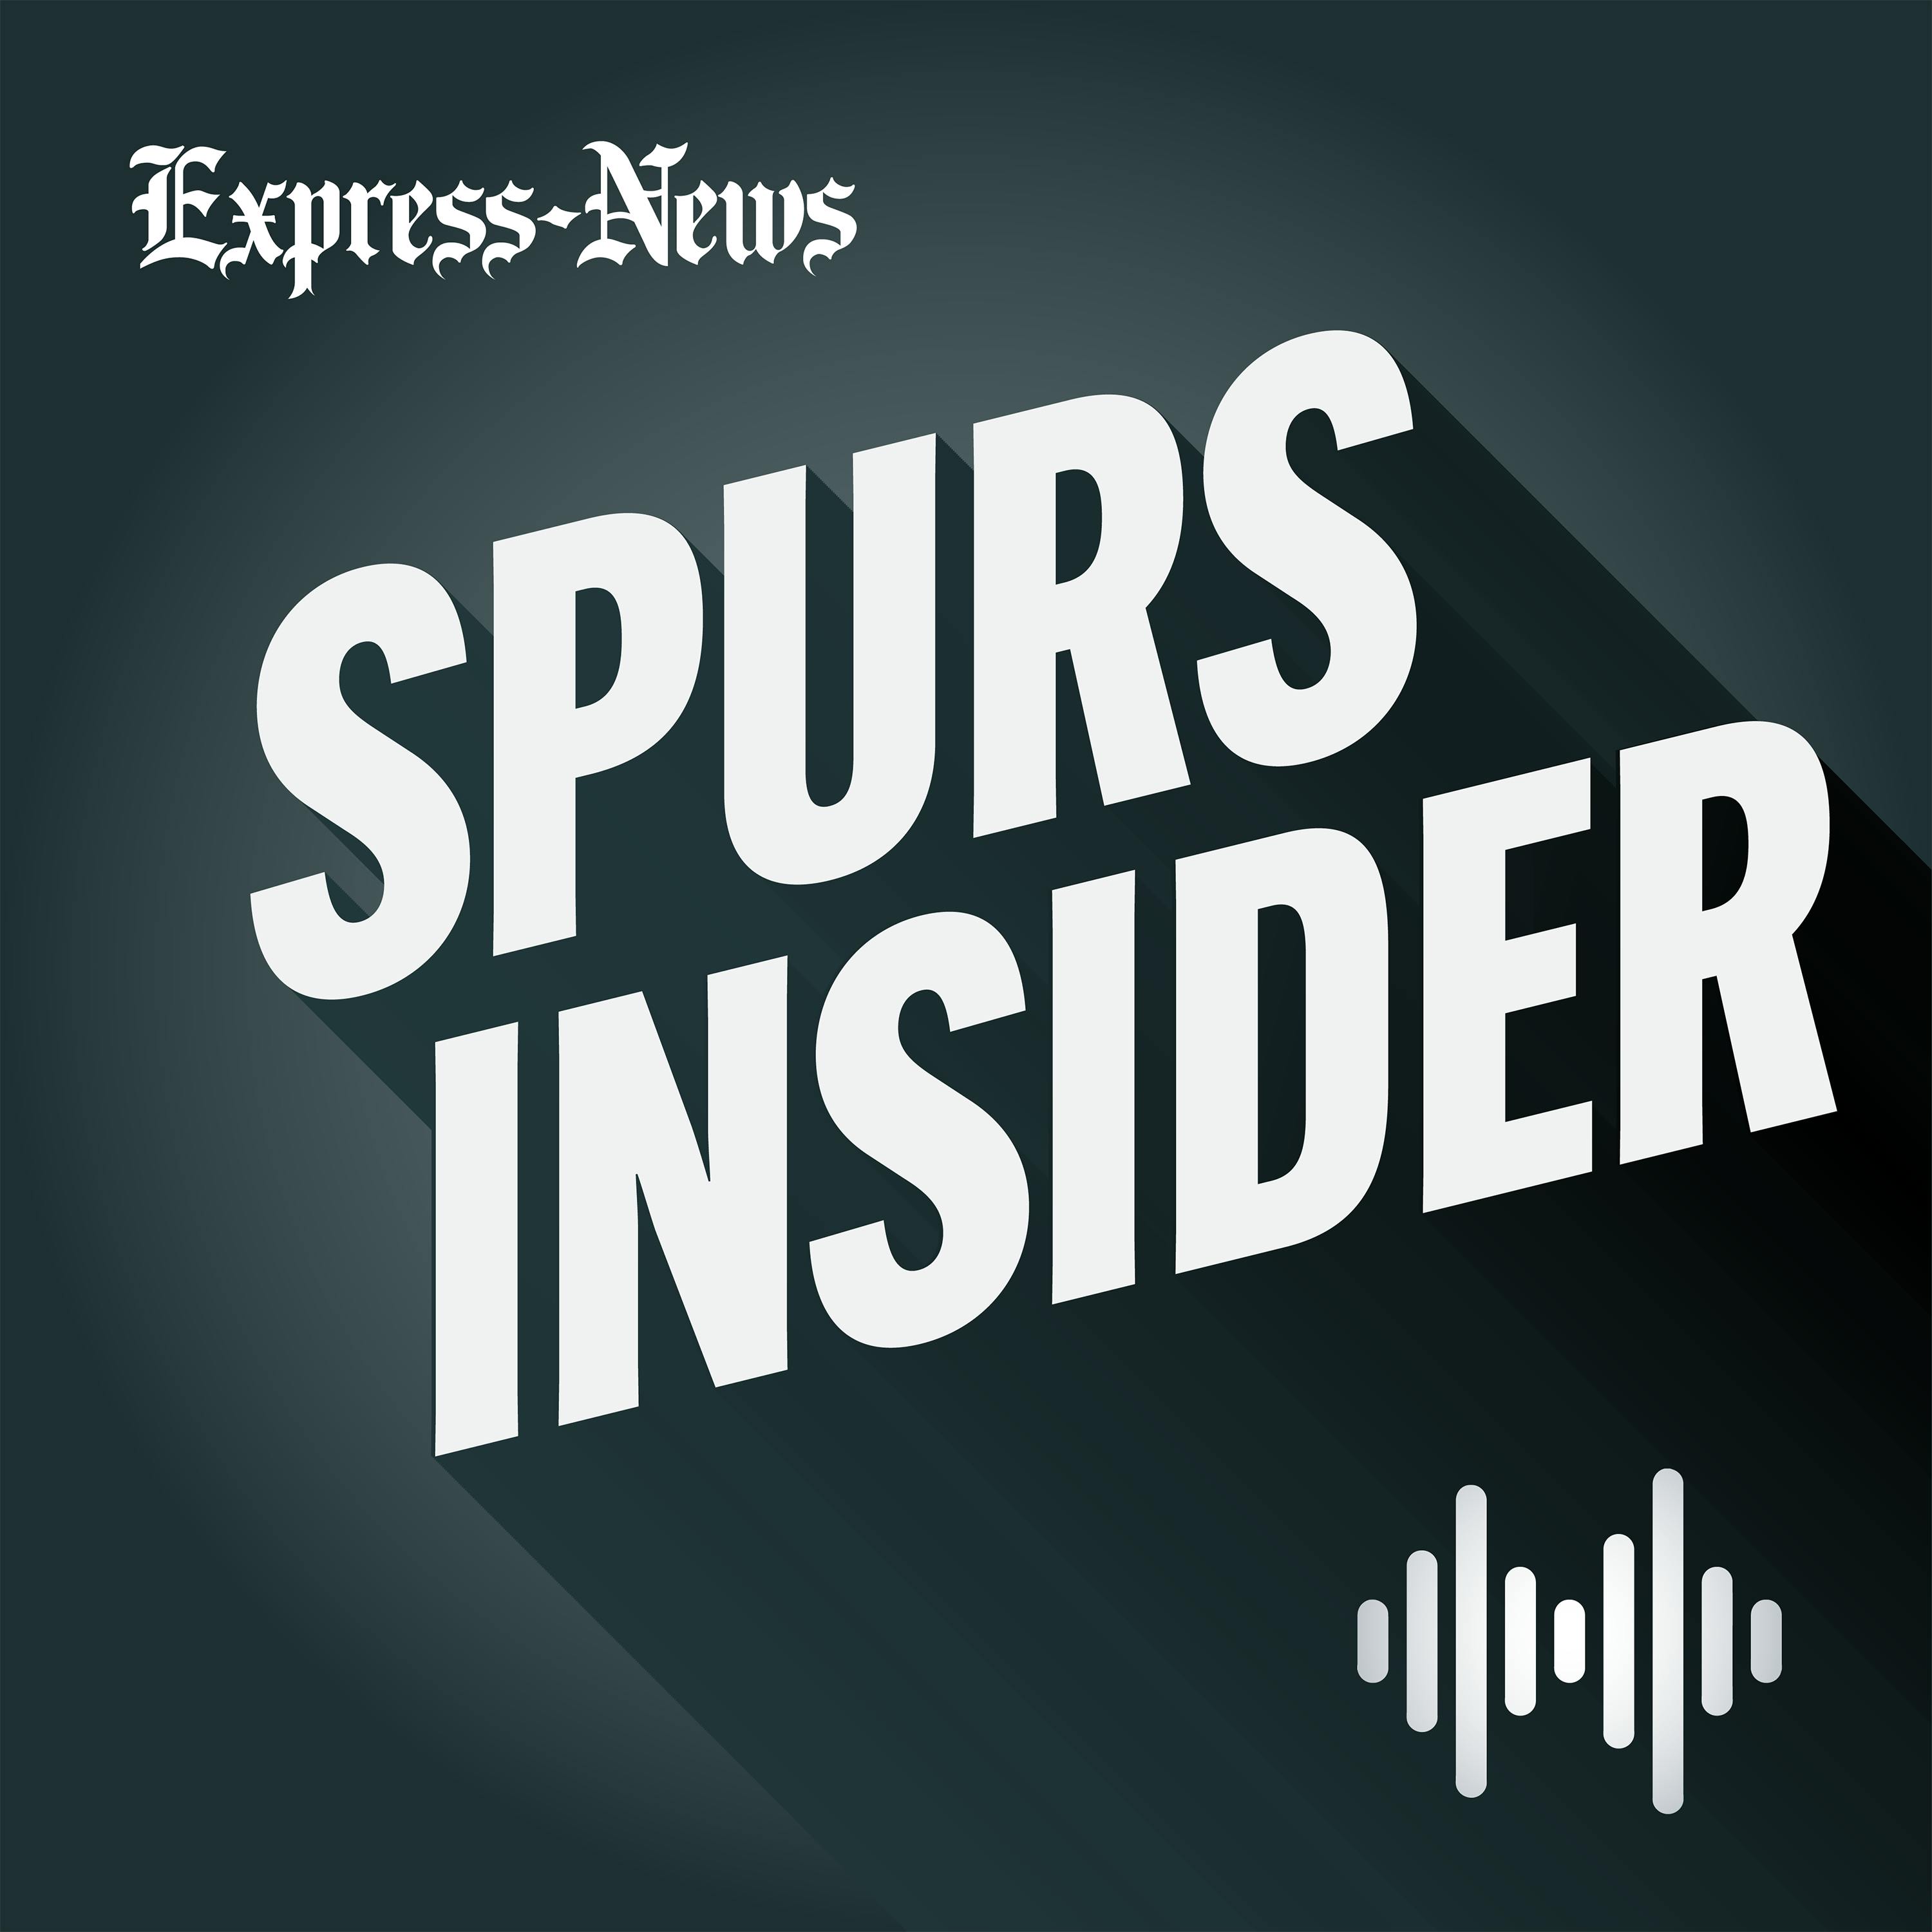 Episode 84: How did the Spurs do in the 2020 NBA draft?